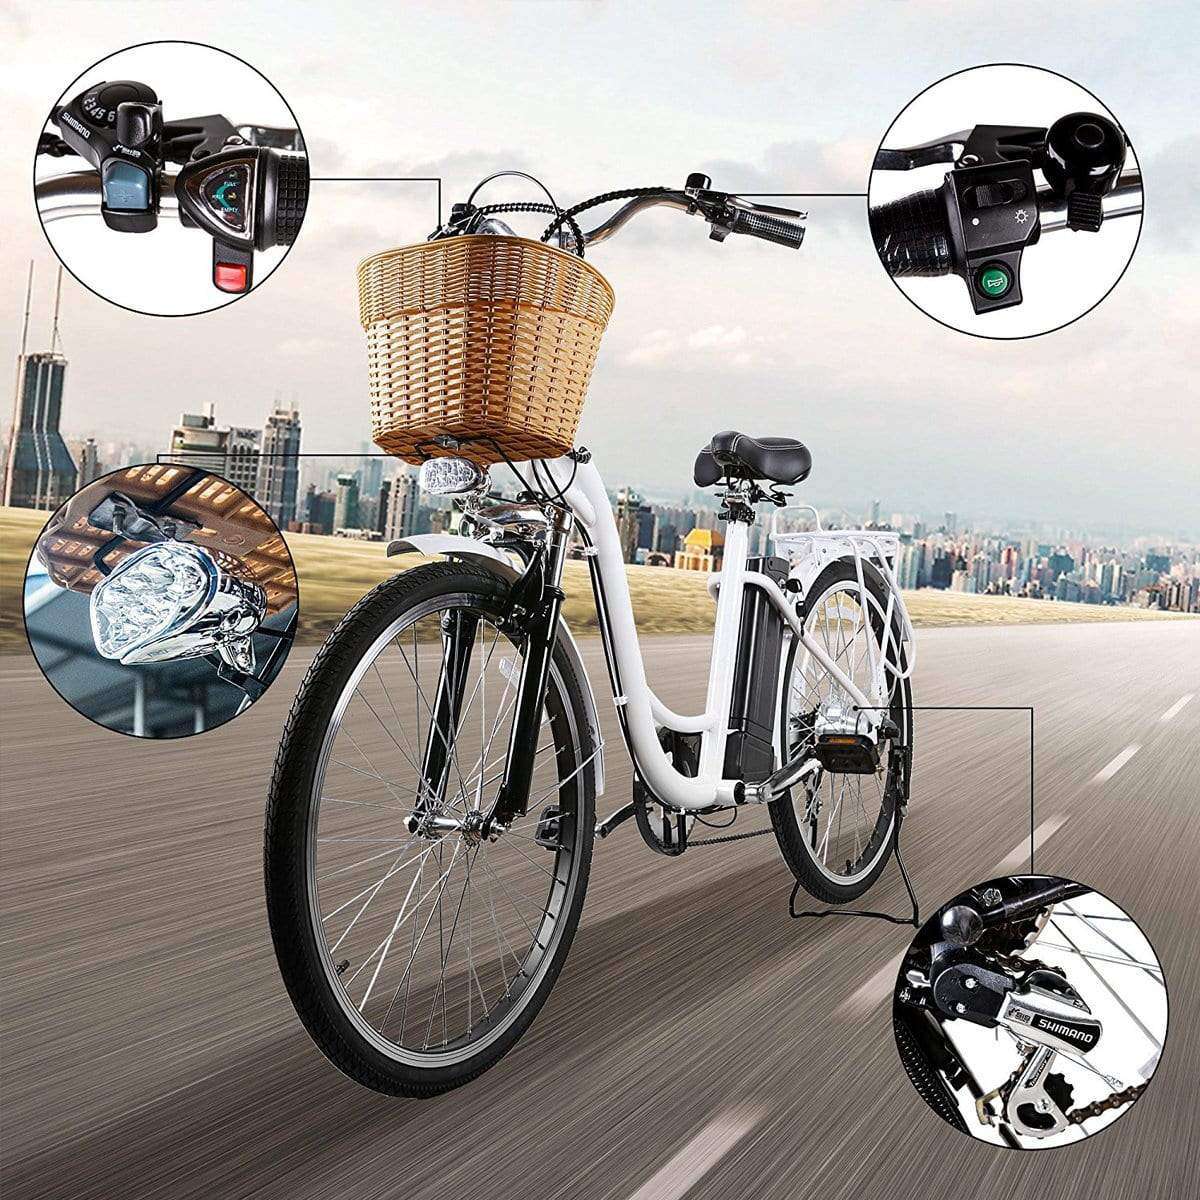 Nakto, NAKTO 26 inch 250W Motor with Peak 350W 19 MPH Camel Electric Bicycle 6 Speed E-Bike 36V Lithium Battery Female/Young Adult White New